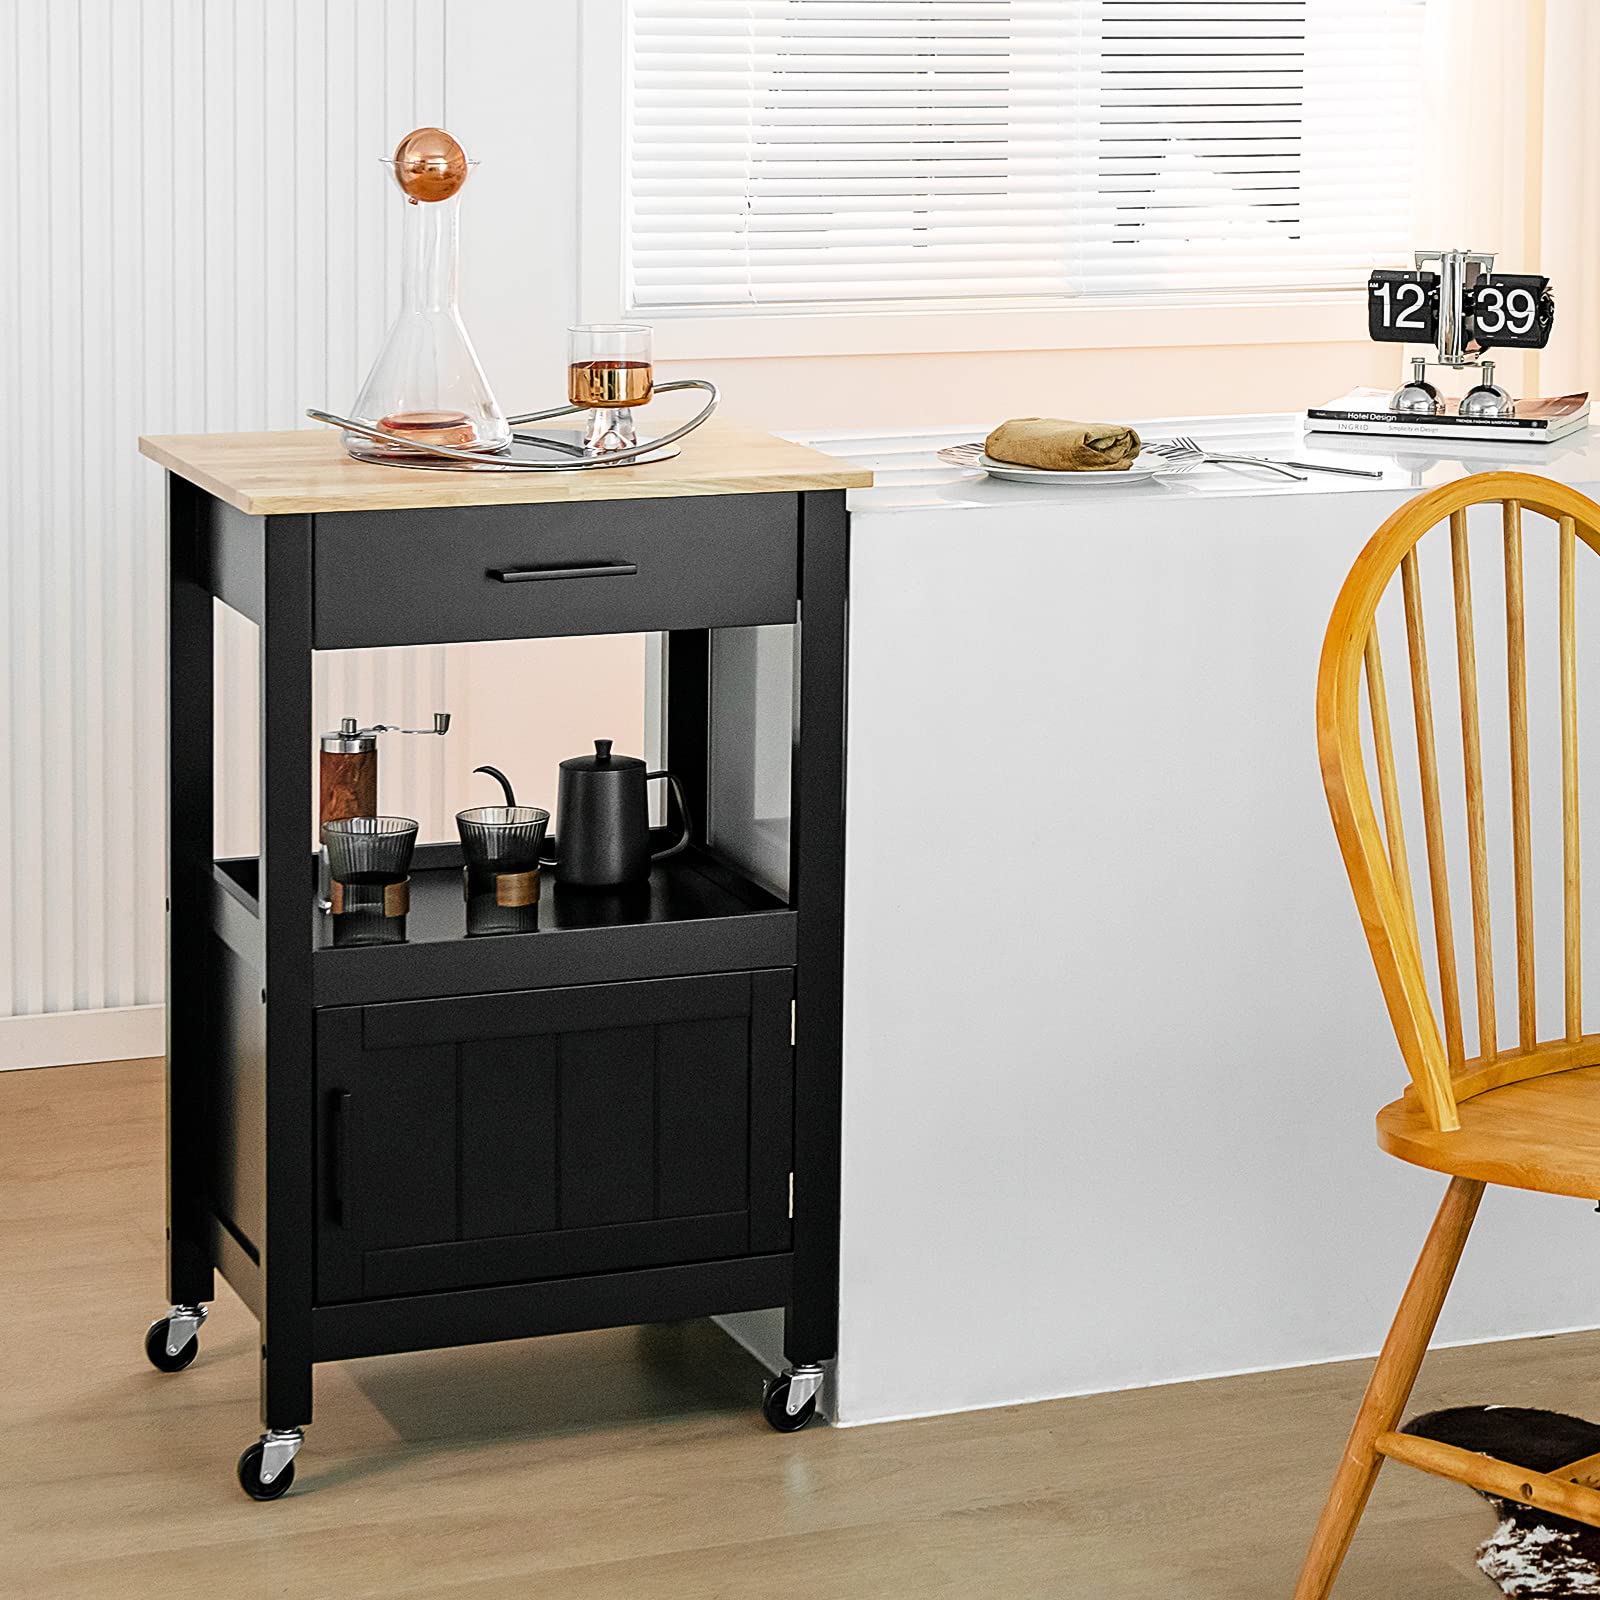 Giantex Kitchen Island with Storage, Small Kitchen Cart on Wheels w/ Drawer, 3 Hooks, Rolling Trolley